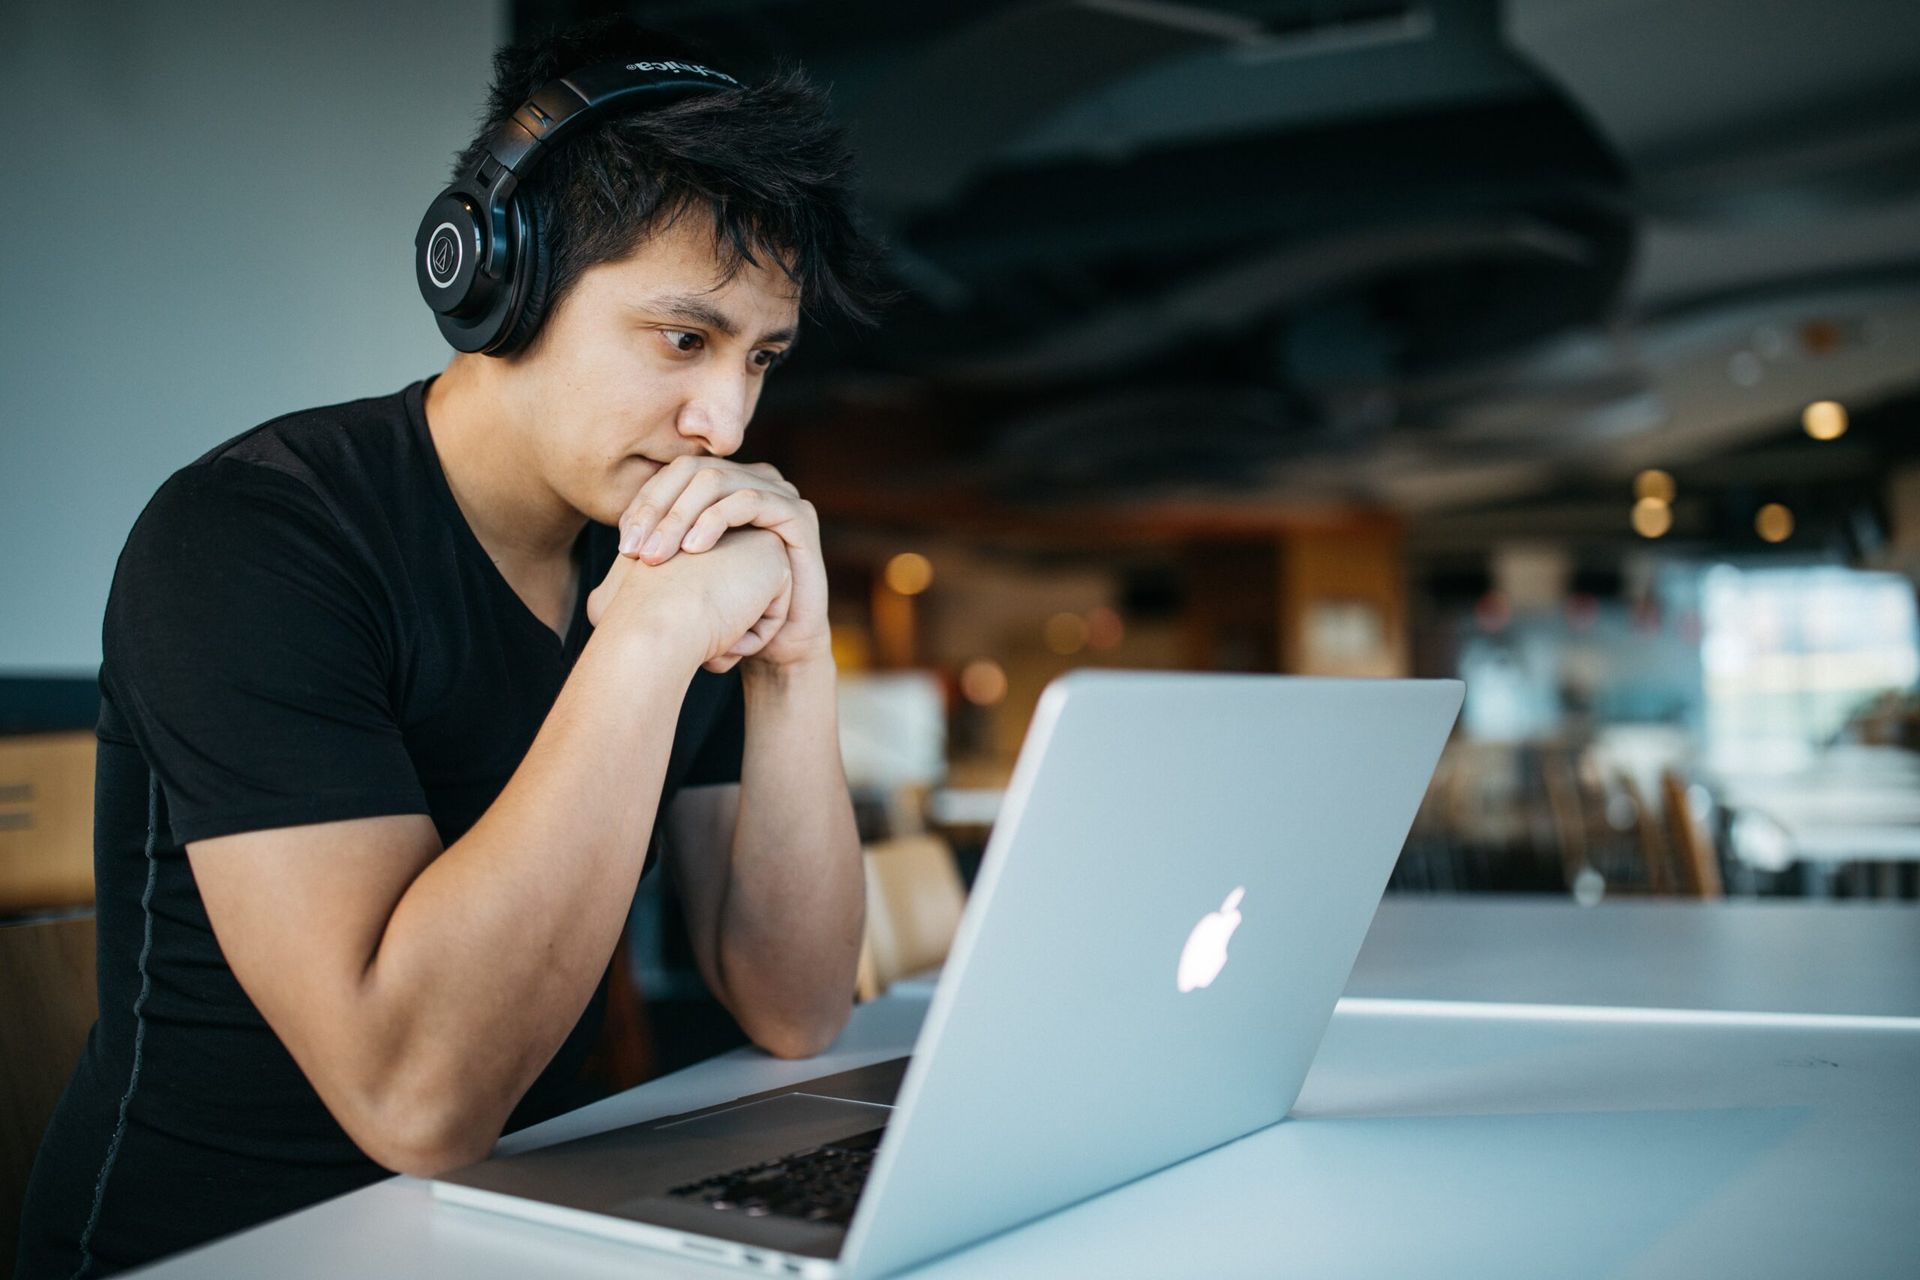 A person wearing headphones using a laptop.